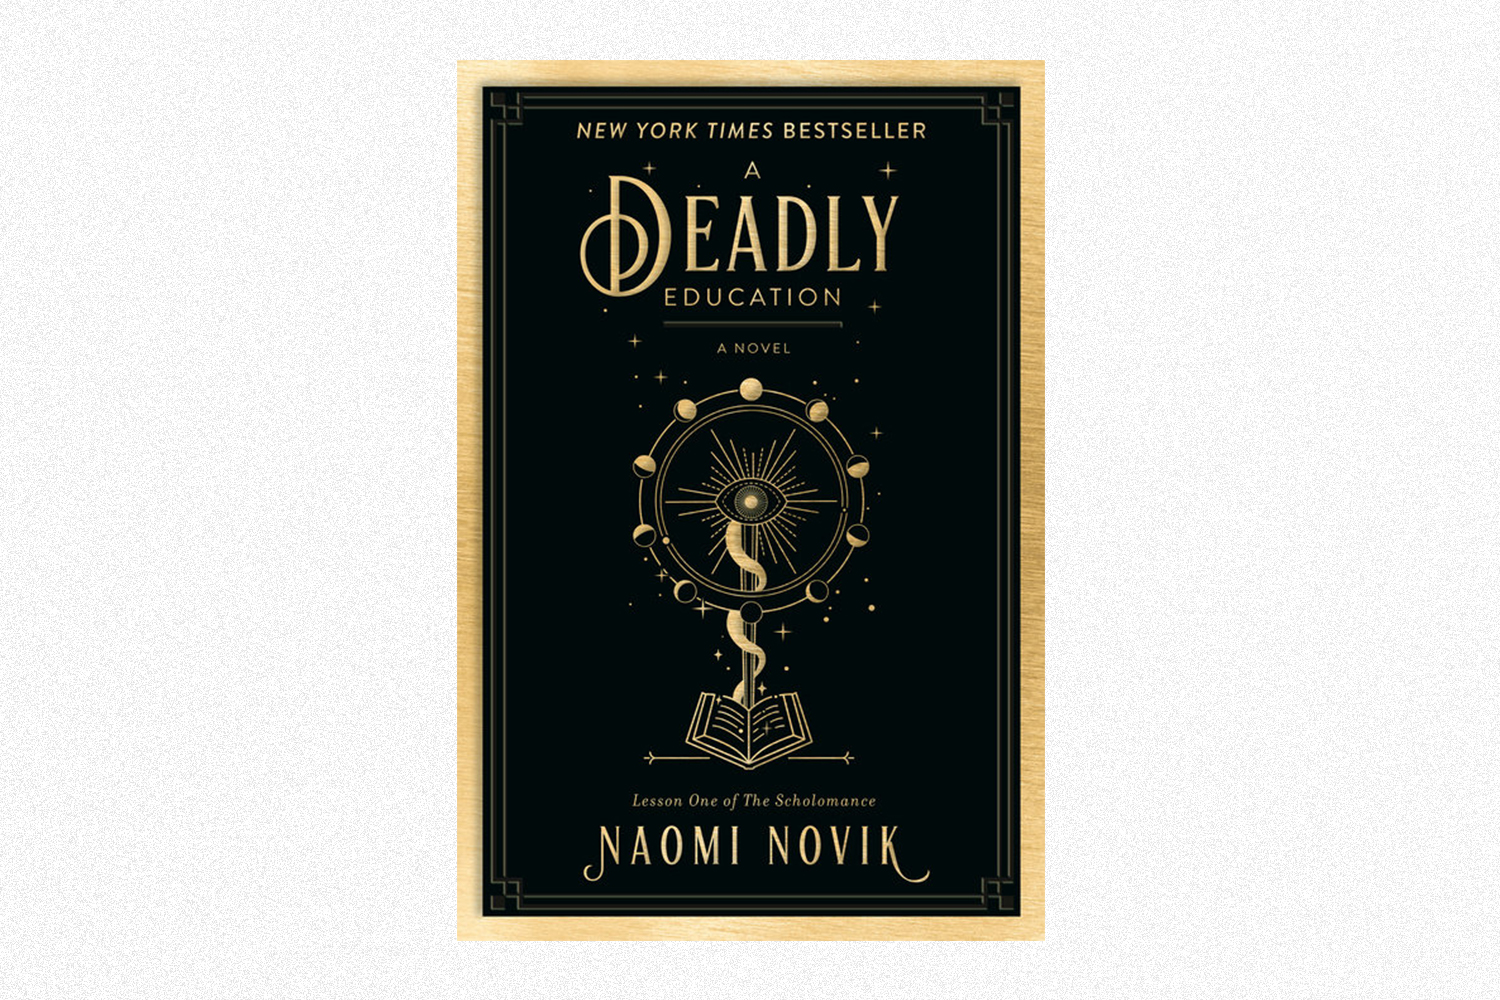 The book cover for A Deadly Education by Naomi Novik